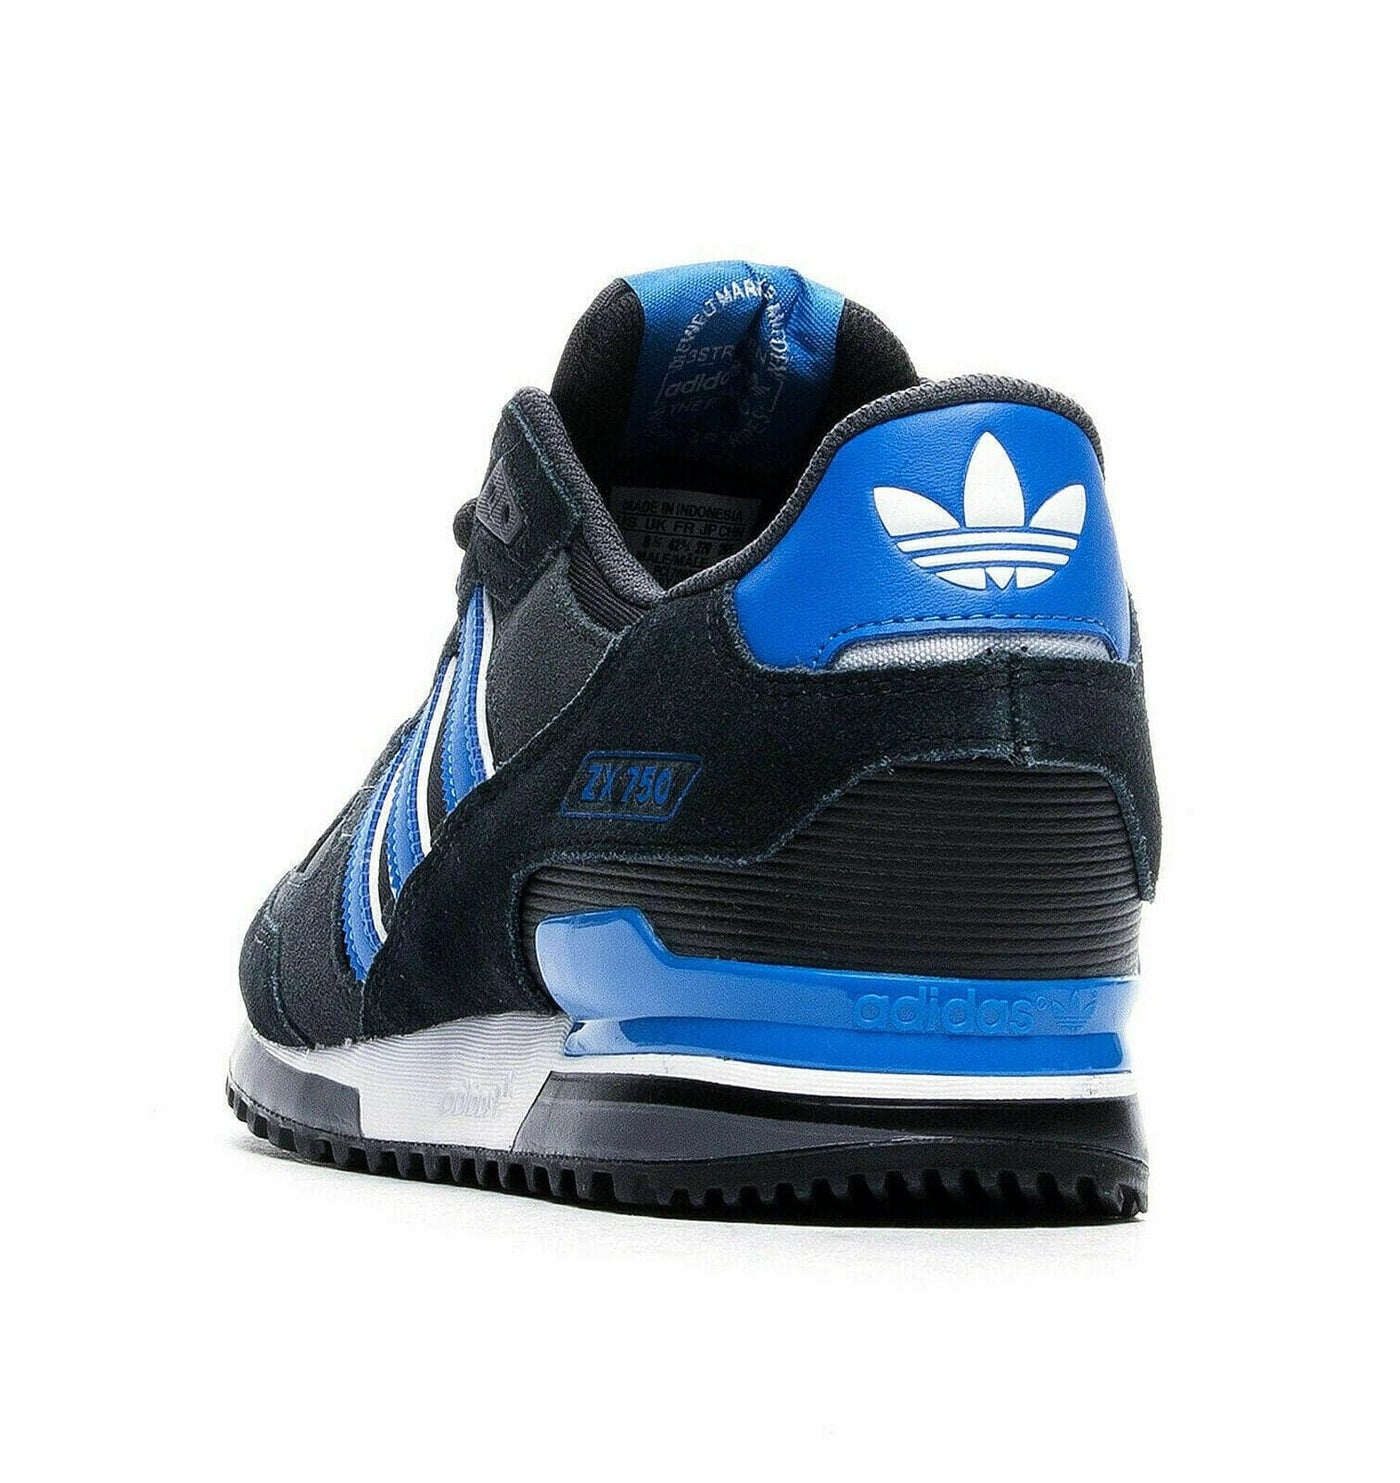 Adidas Men's ZX 750 Black/Blue Trainers **** VS4 - Big_Stock_Clearance